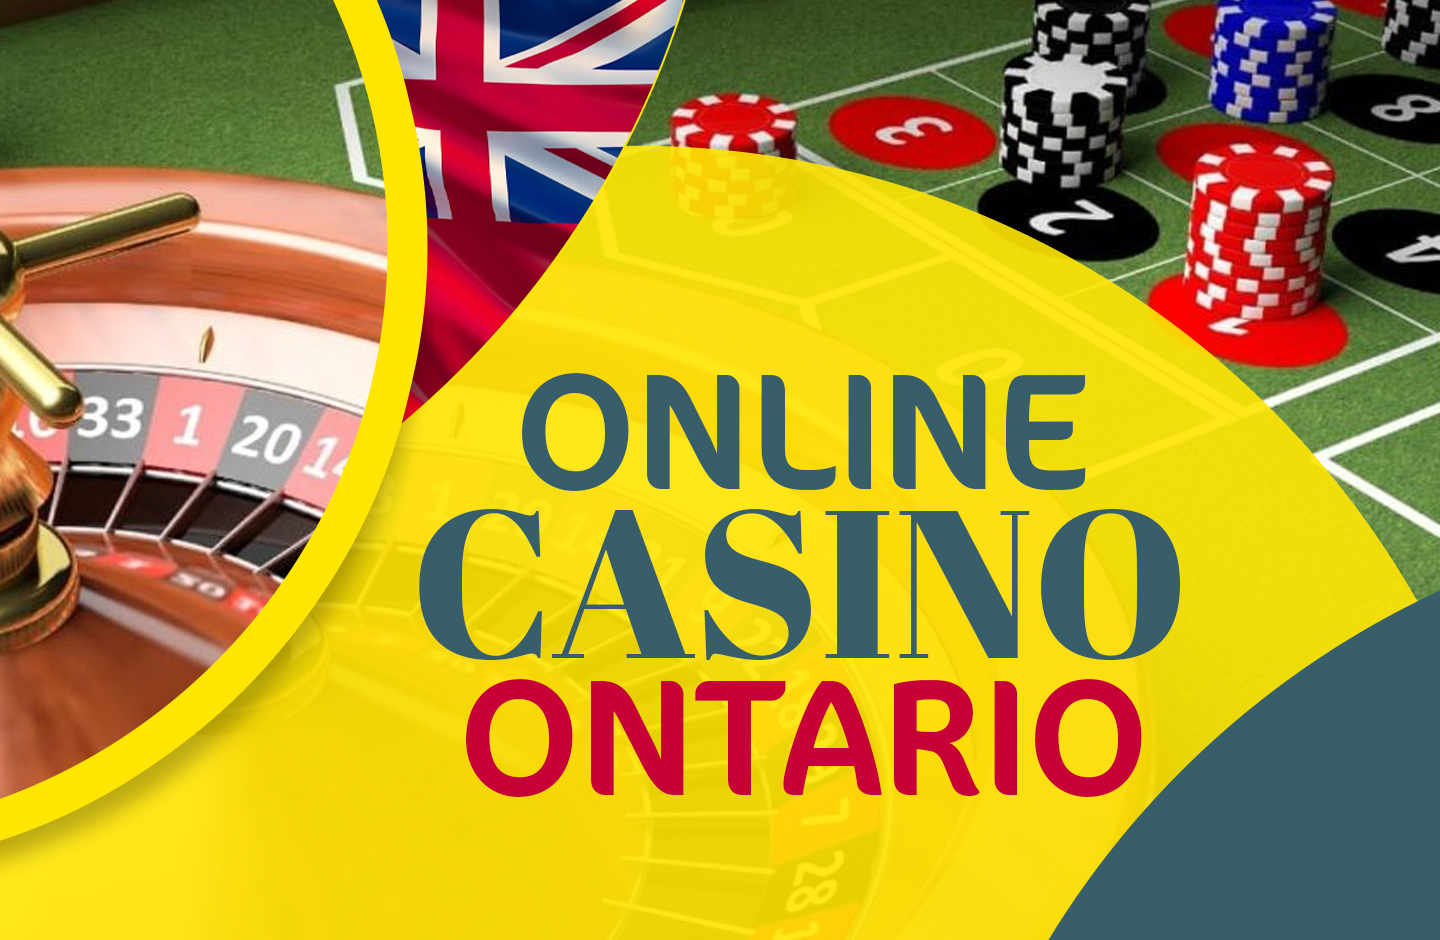 The website that he describes in the articles on online casino is an important entry